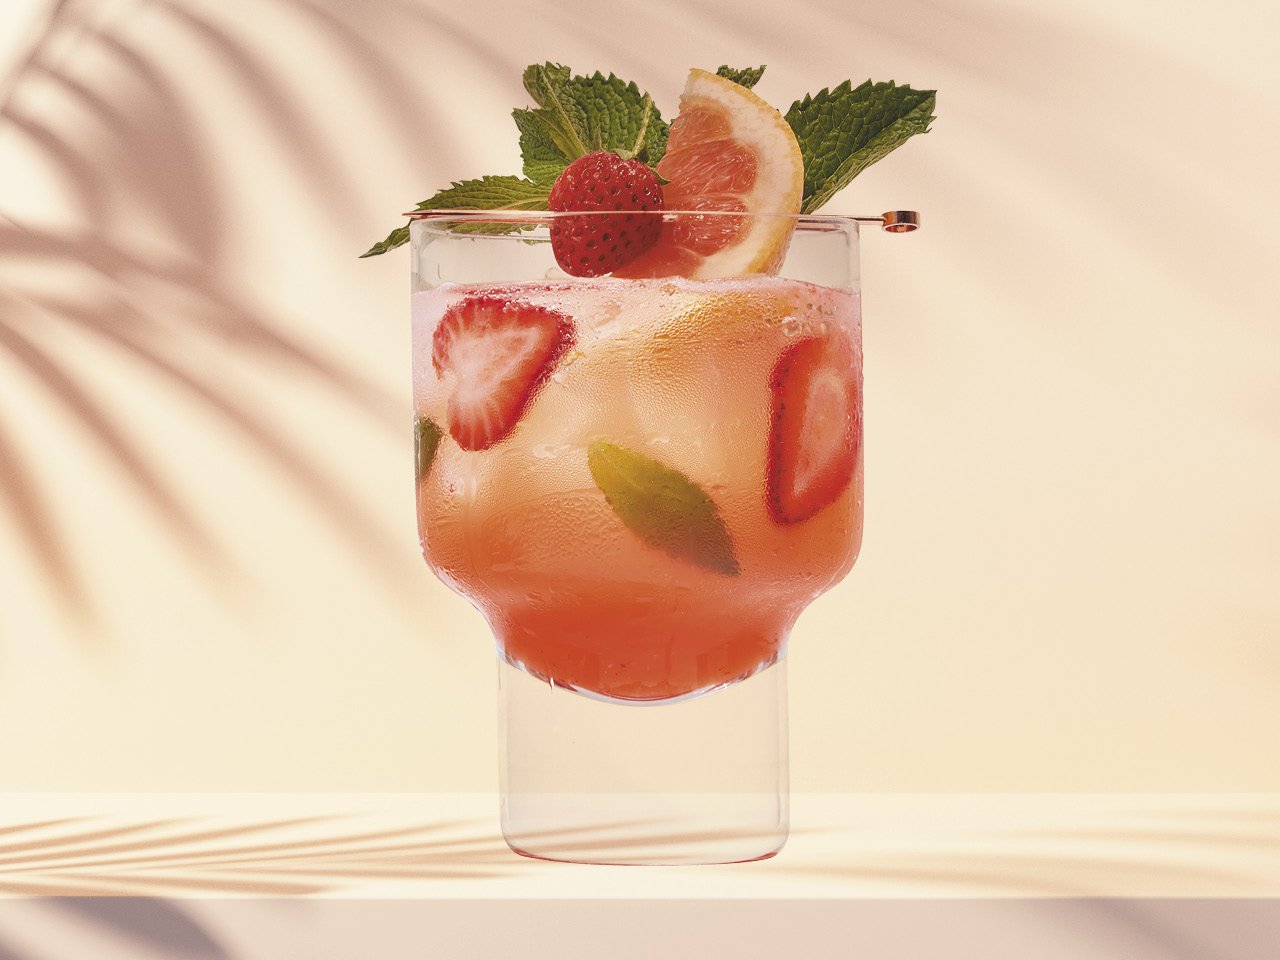 Strawberry grapefruit cocktail in a glass, wth mint leaves. In front of a beige background.